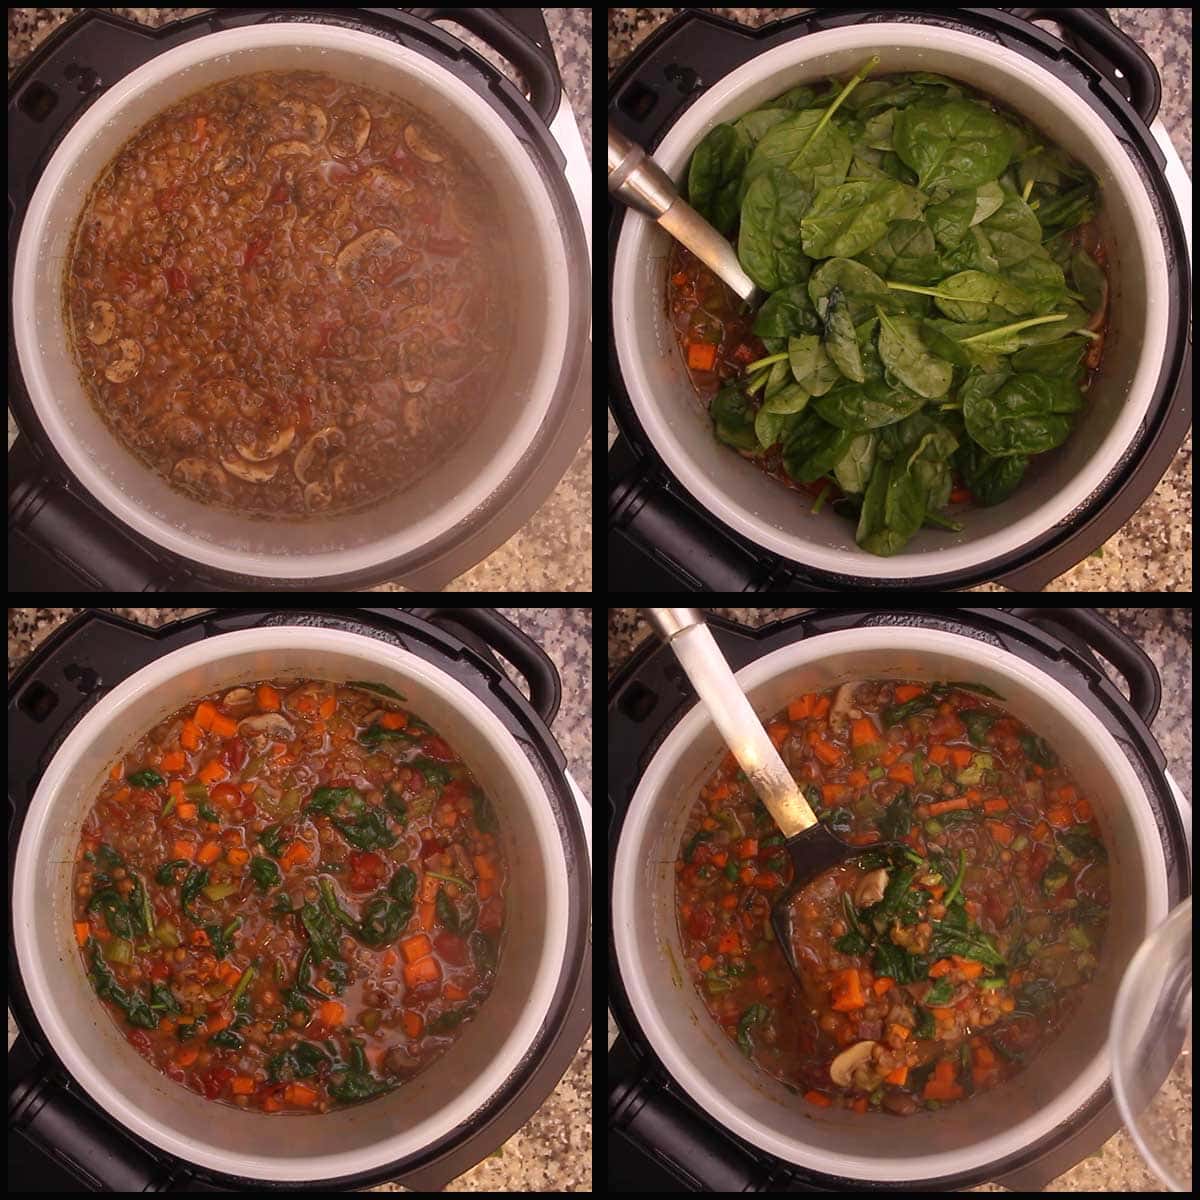 adding spinach to finish the vegetable lentil soup